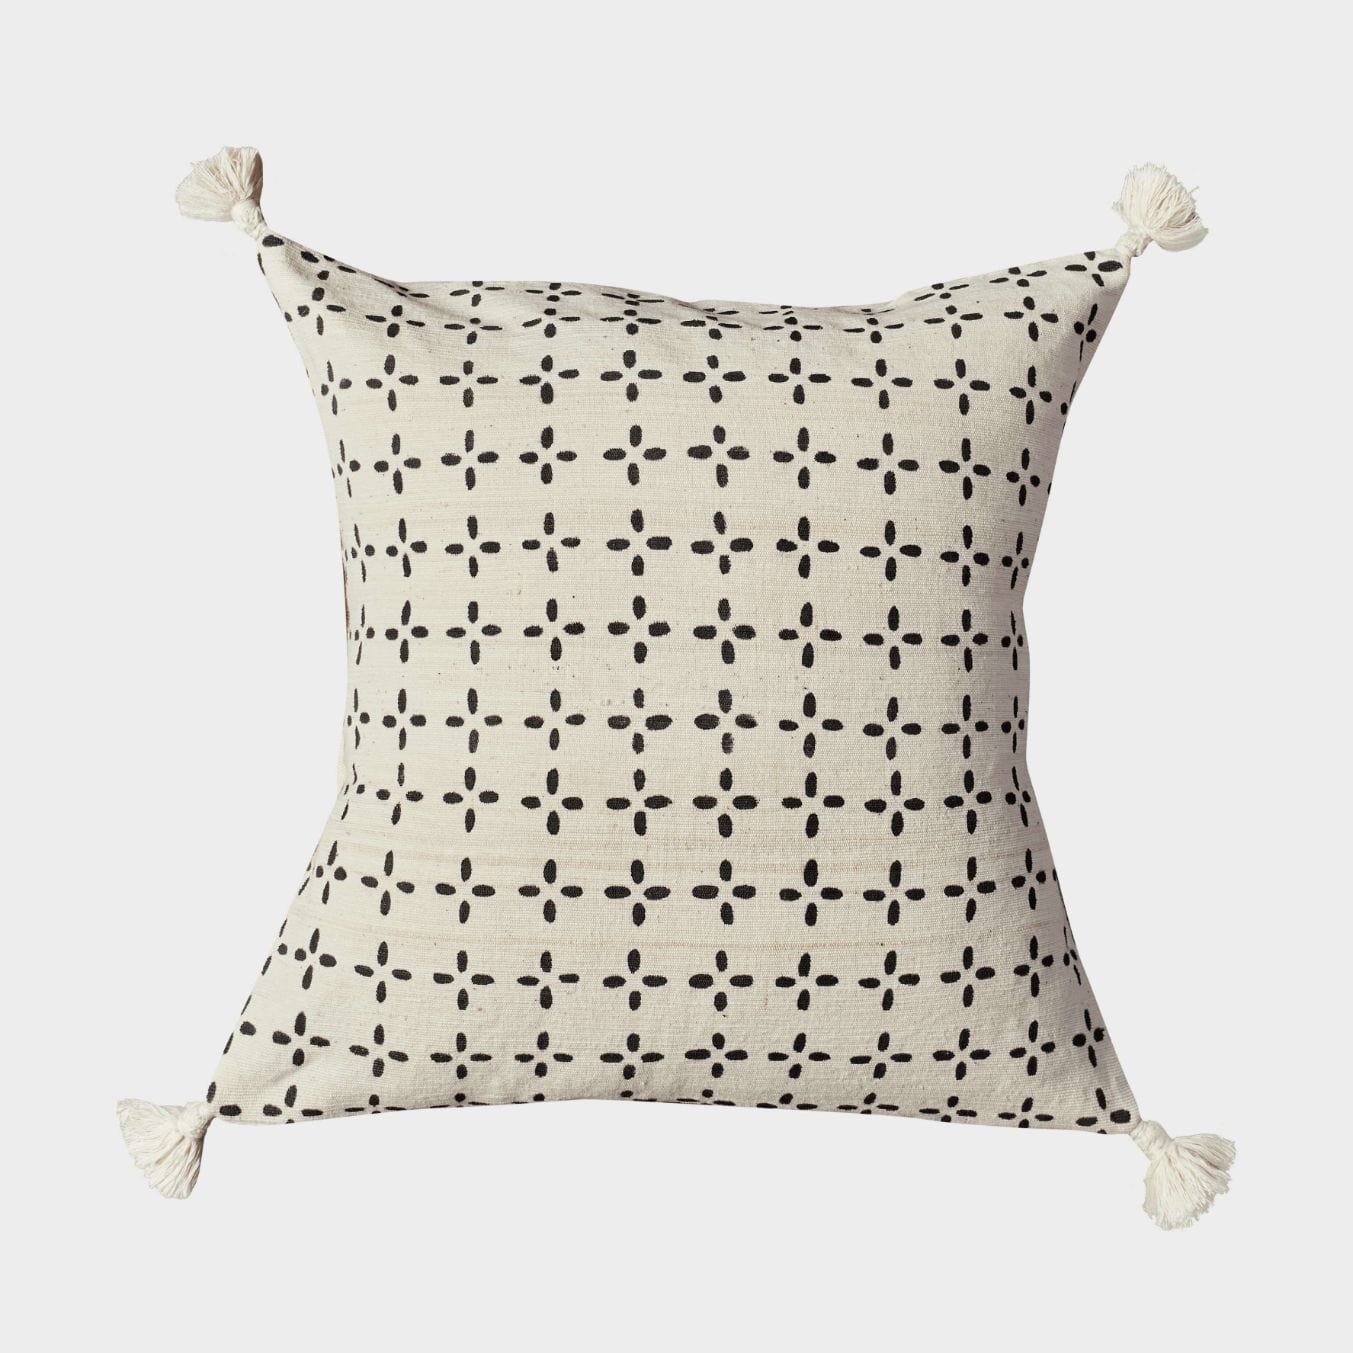 Zori Half Moon Mudcloth Pillow Cover deconstructed 